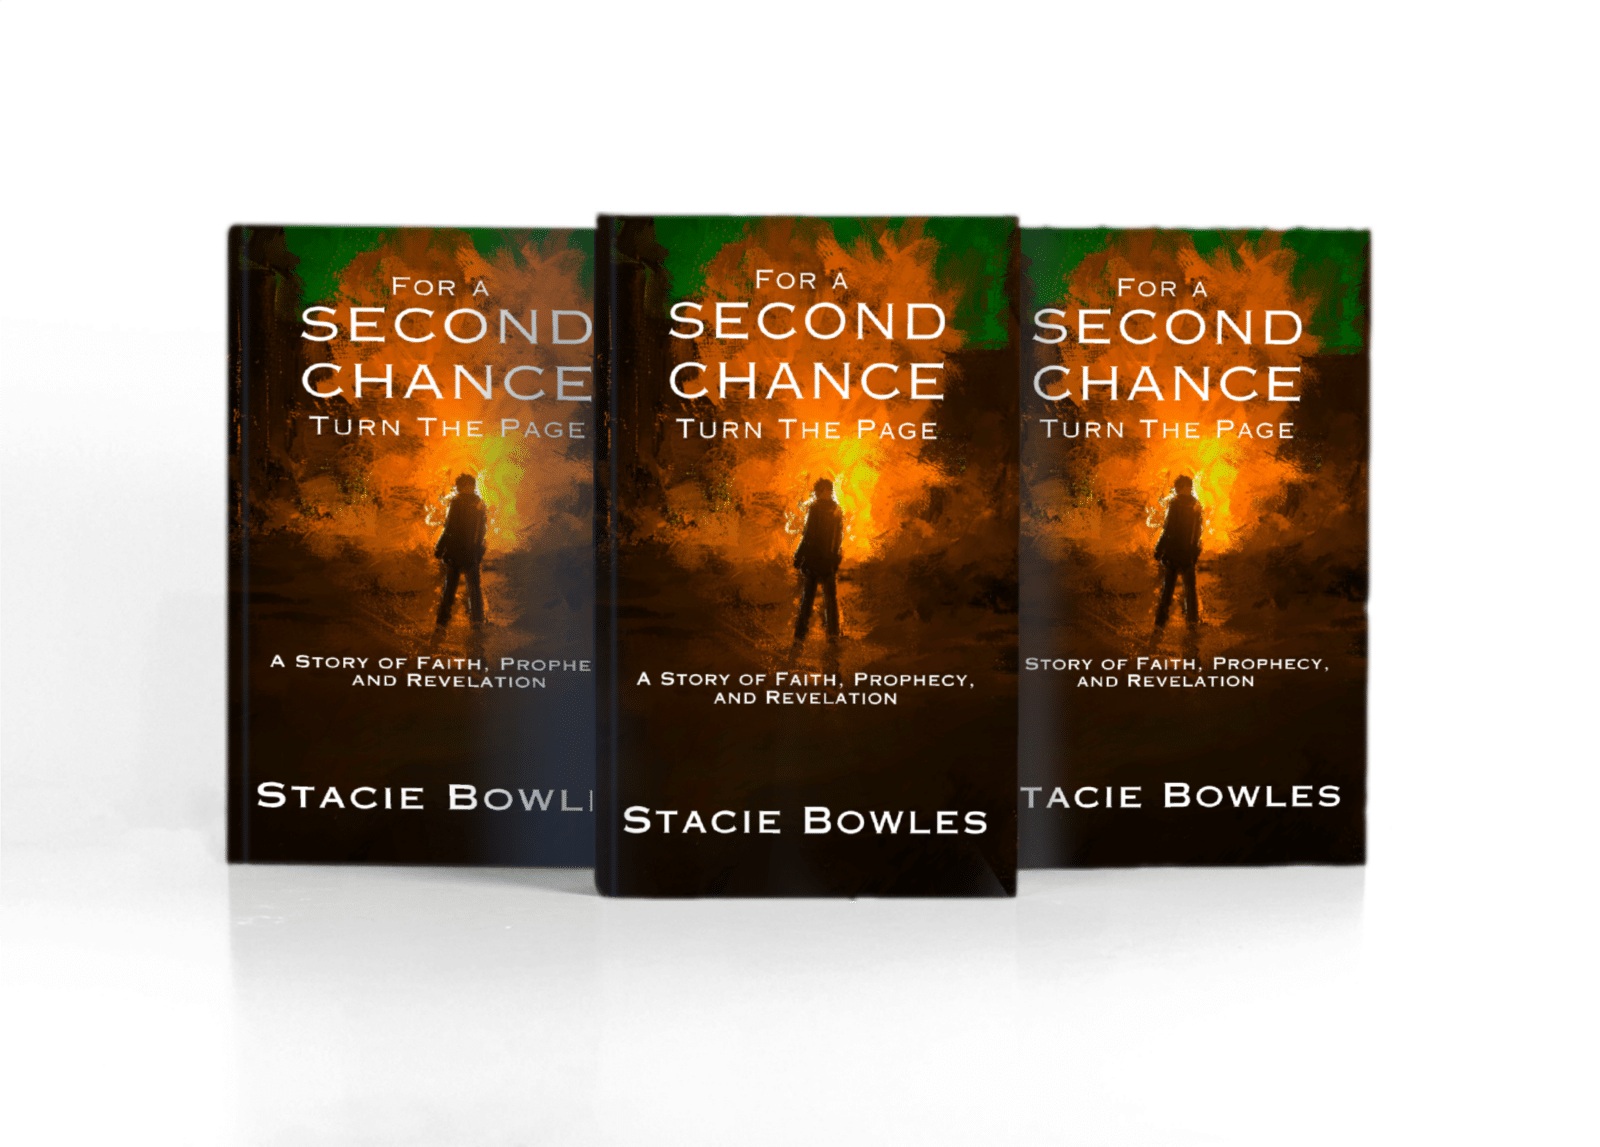 Mockups of Stacie Bowles book "For A Second Chance Turn the Page"